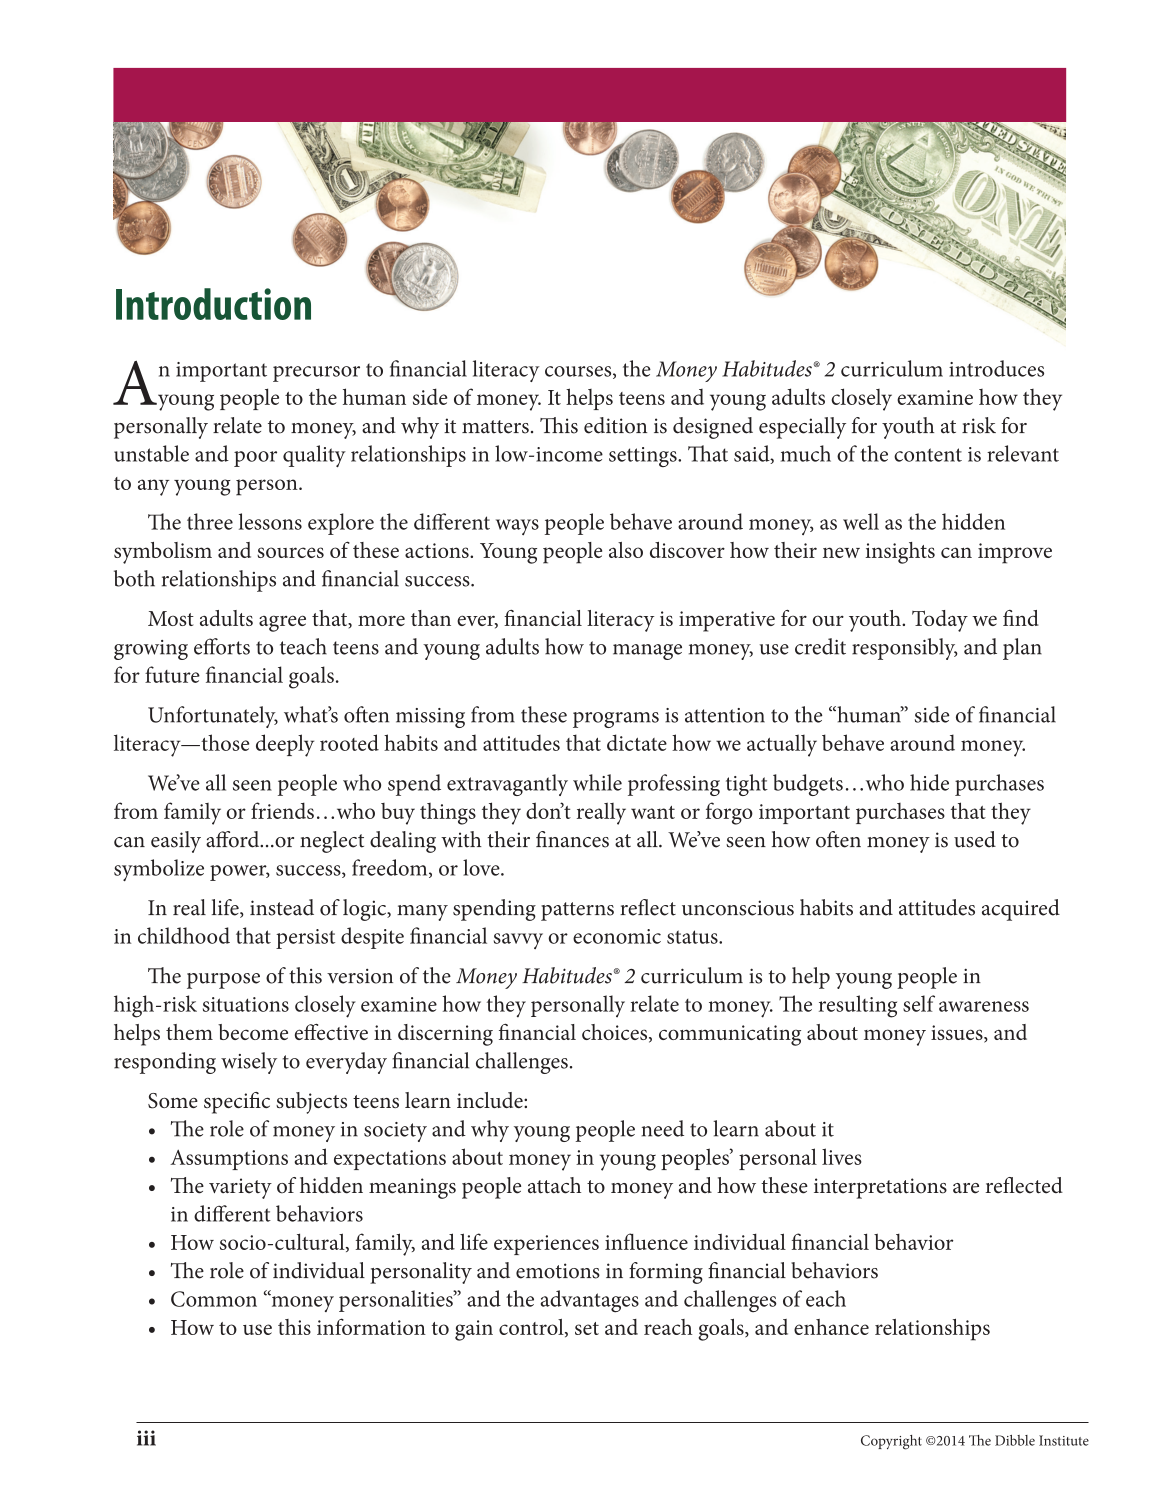 Money Habitudes 2®: For Young Adults page 4